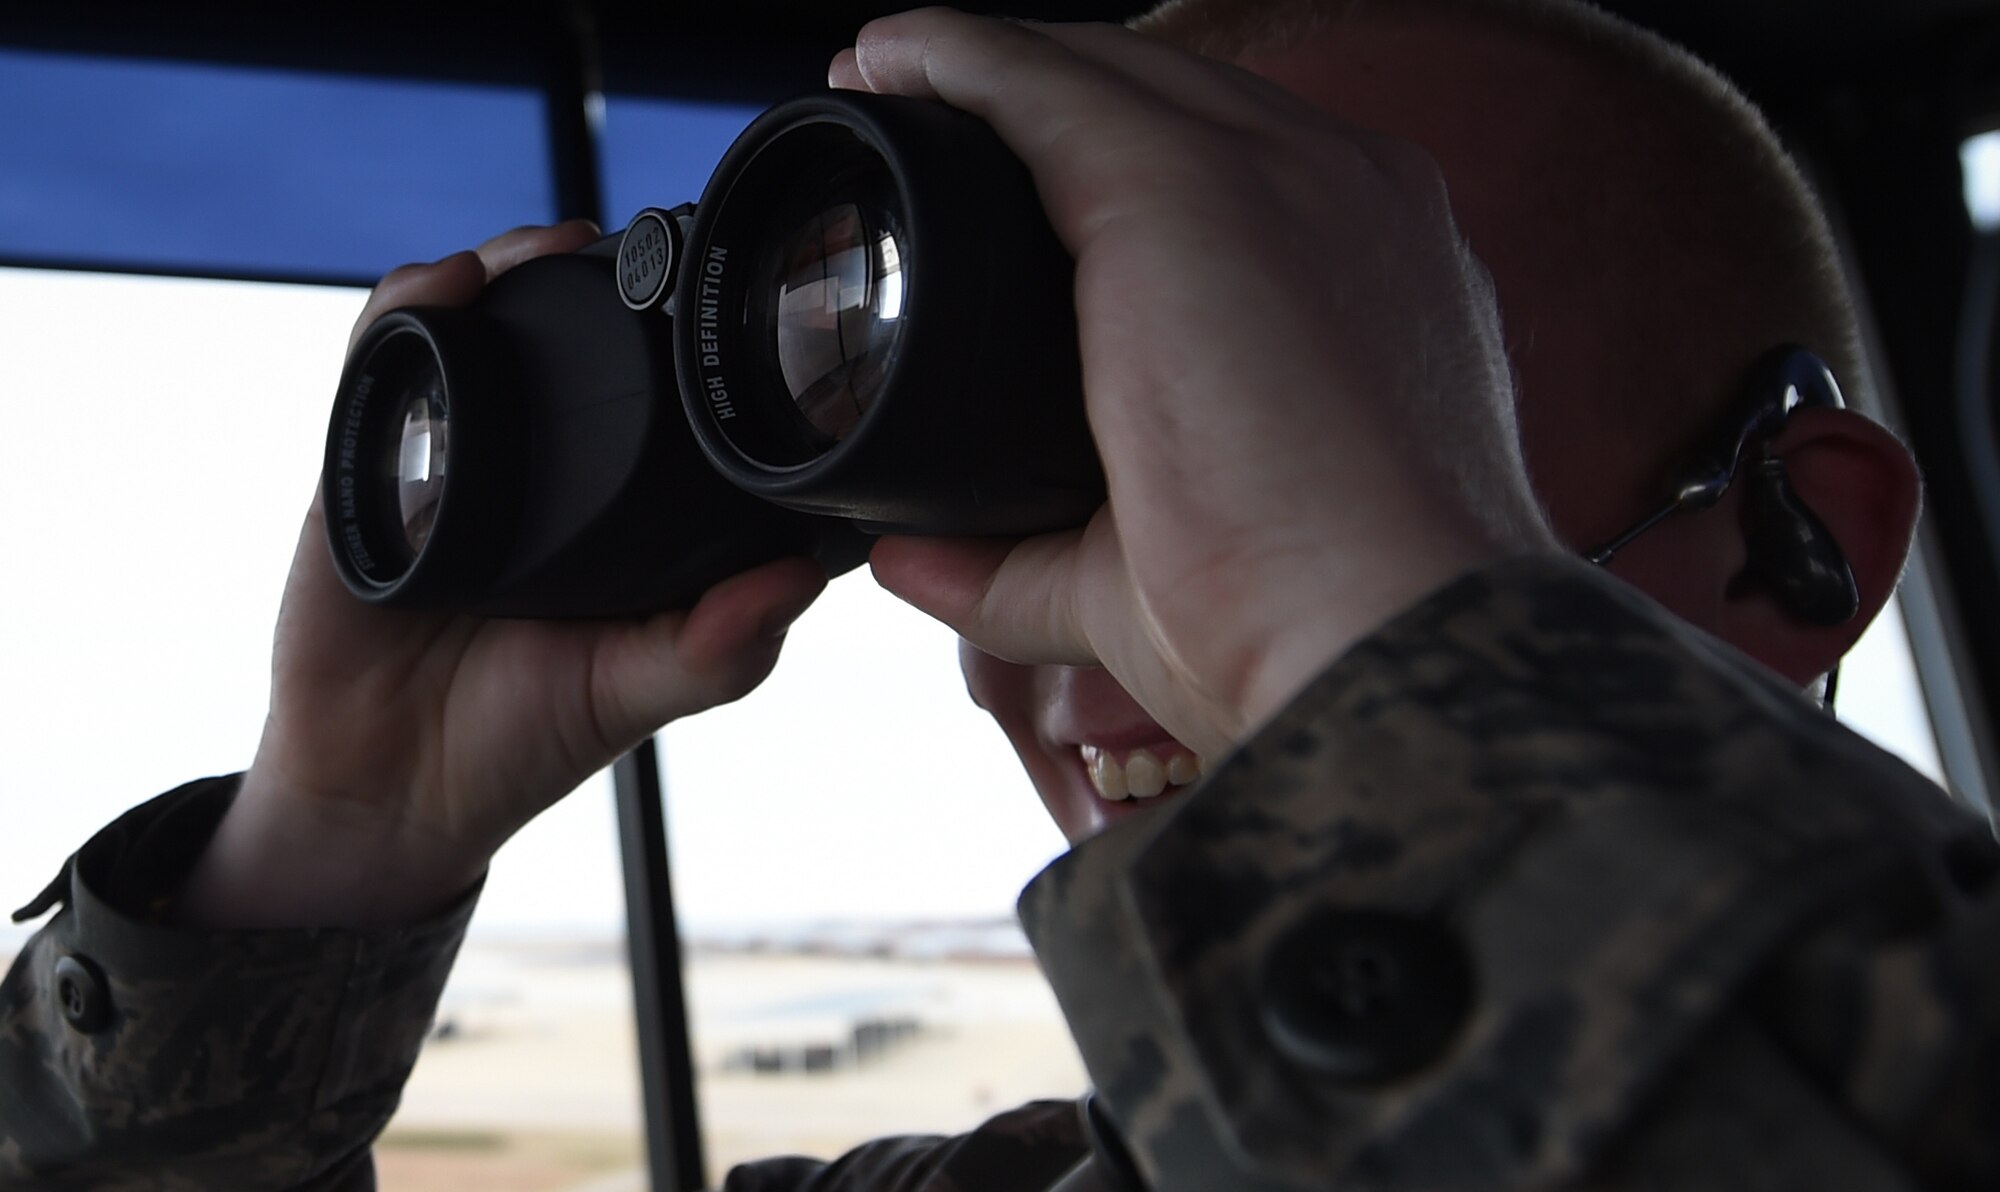 U.S. Air Force Senior Airman Patrick Taylor, 1st Operations Support Squadron air traffic controller, watches airfield traffic at Joint Base Langley-Eustis, Va., Dec. 16, 2016. The control tower supports the 1st Fighter Wing in addition to NASA, transient aircraft, Fort Eustis and distinguished visitor aircraft flying missions. (U.S. Air Force photo by Staff Sgt. Natasha Stannard)